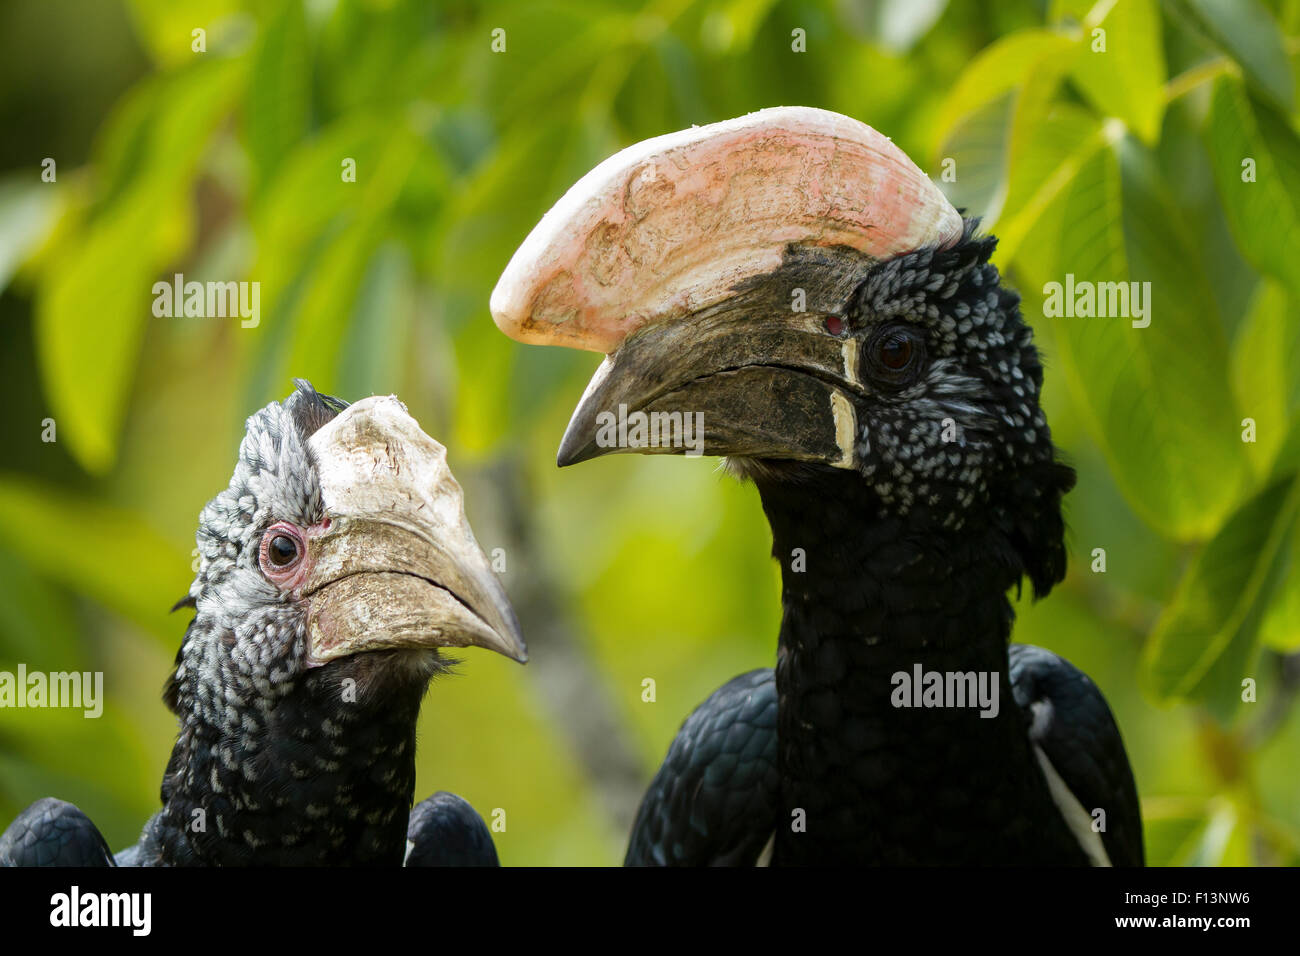 Silvery-cheeked Hornbill (Bycanistes brevis) close-up at zoo, occurs in East Africa. Stock Photo